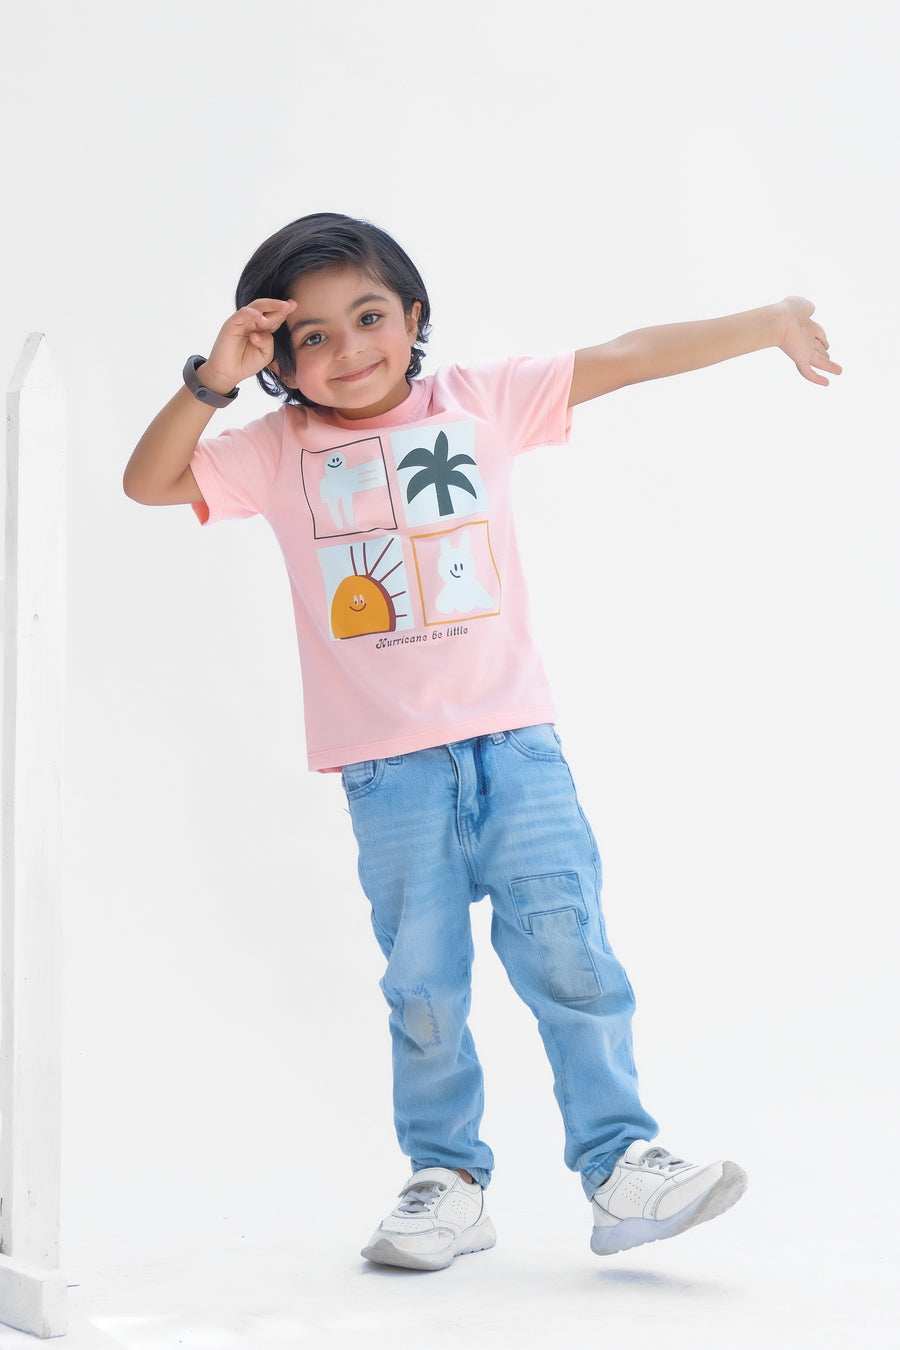 Hurricane Be Little  - Half Sleeves T-Shirts For Kids - Pink - SBT-356